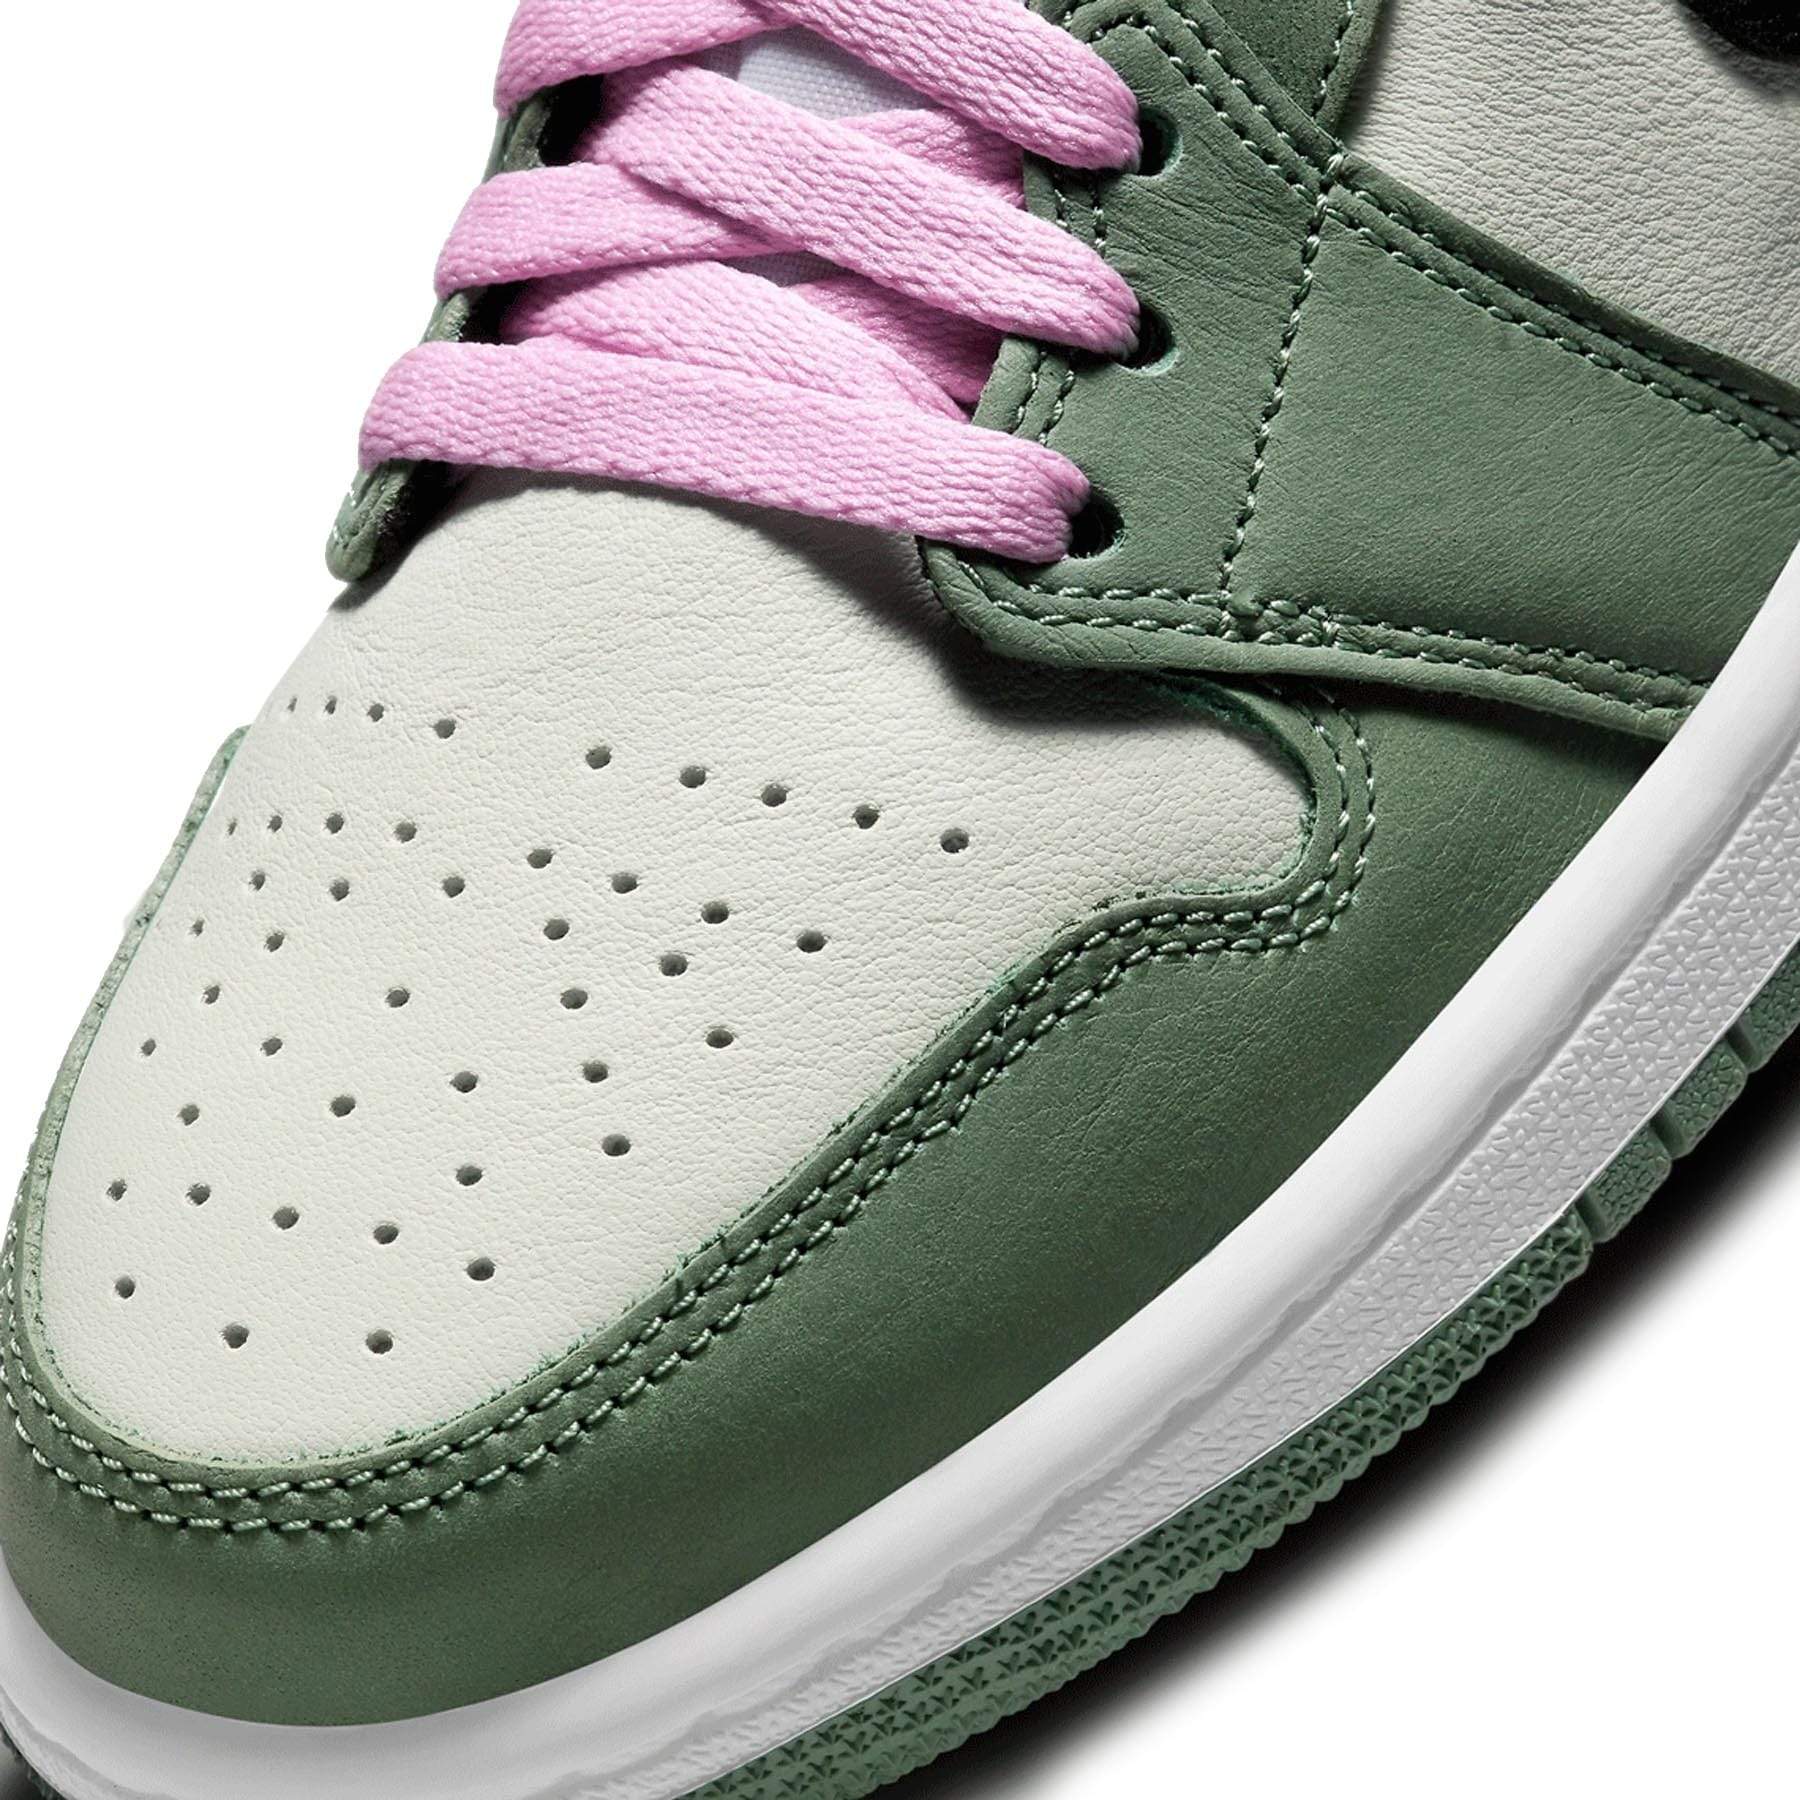 green jordan 1 with pink laces